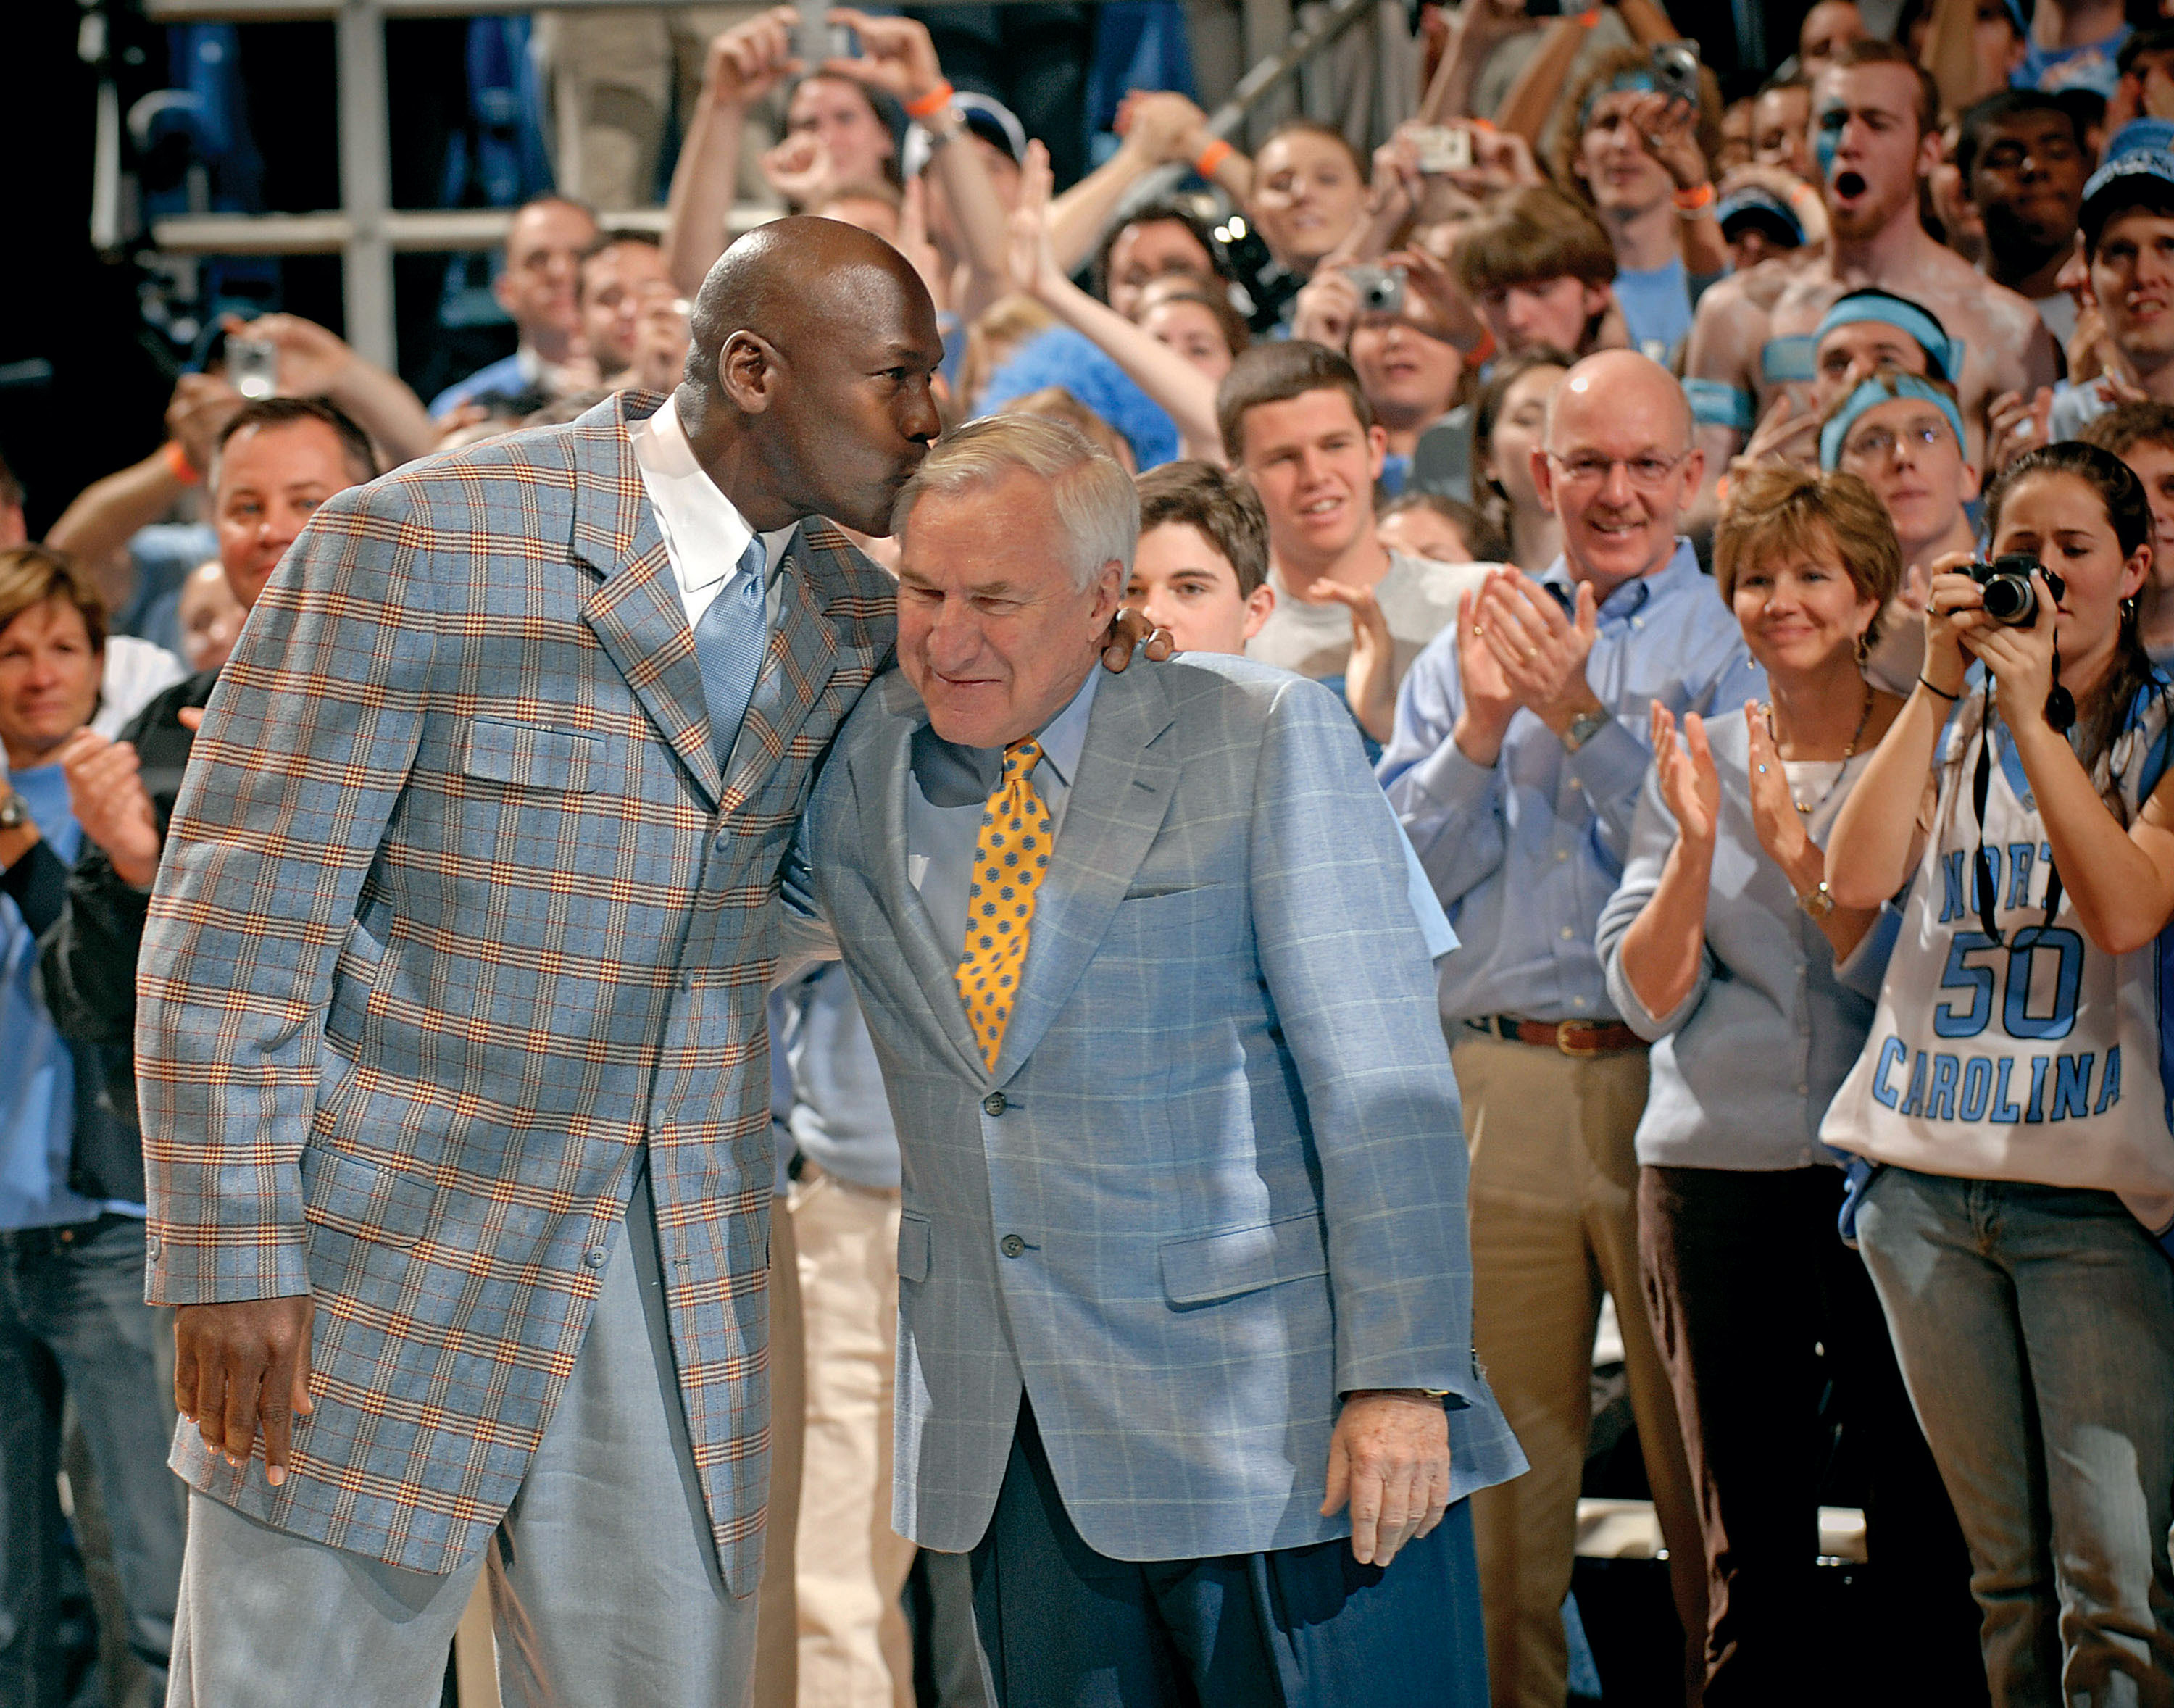 Michael Jordan kisses former coach Dean Smith of the North Carolina Tar Heels during a halftime ceremony honoring the 1993 national championship team